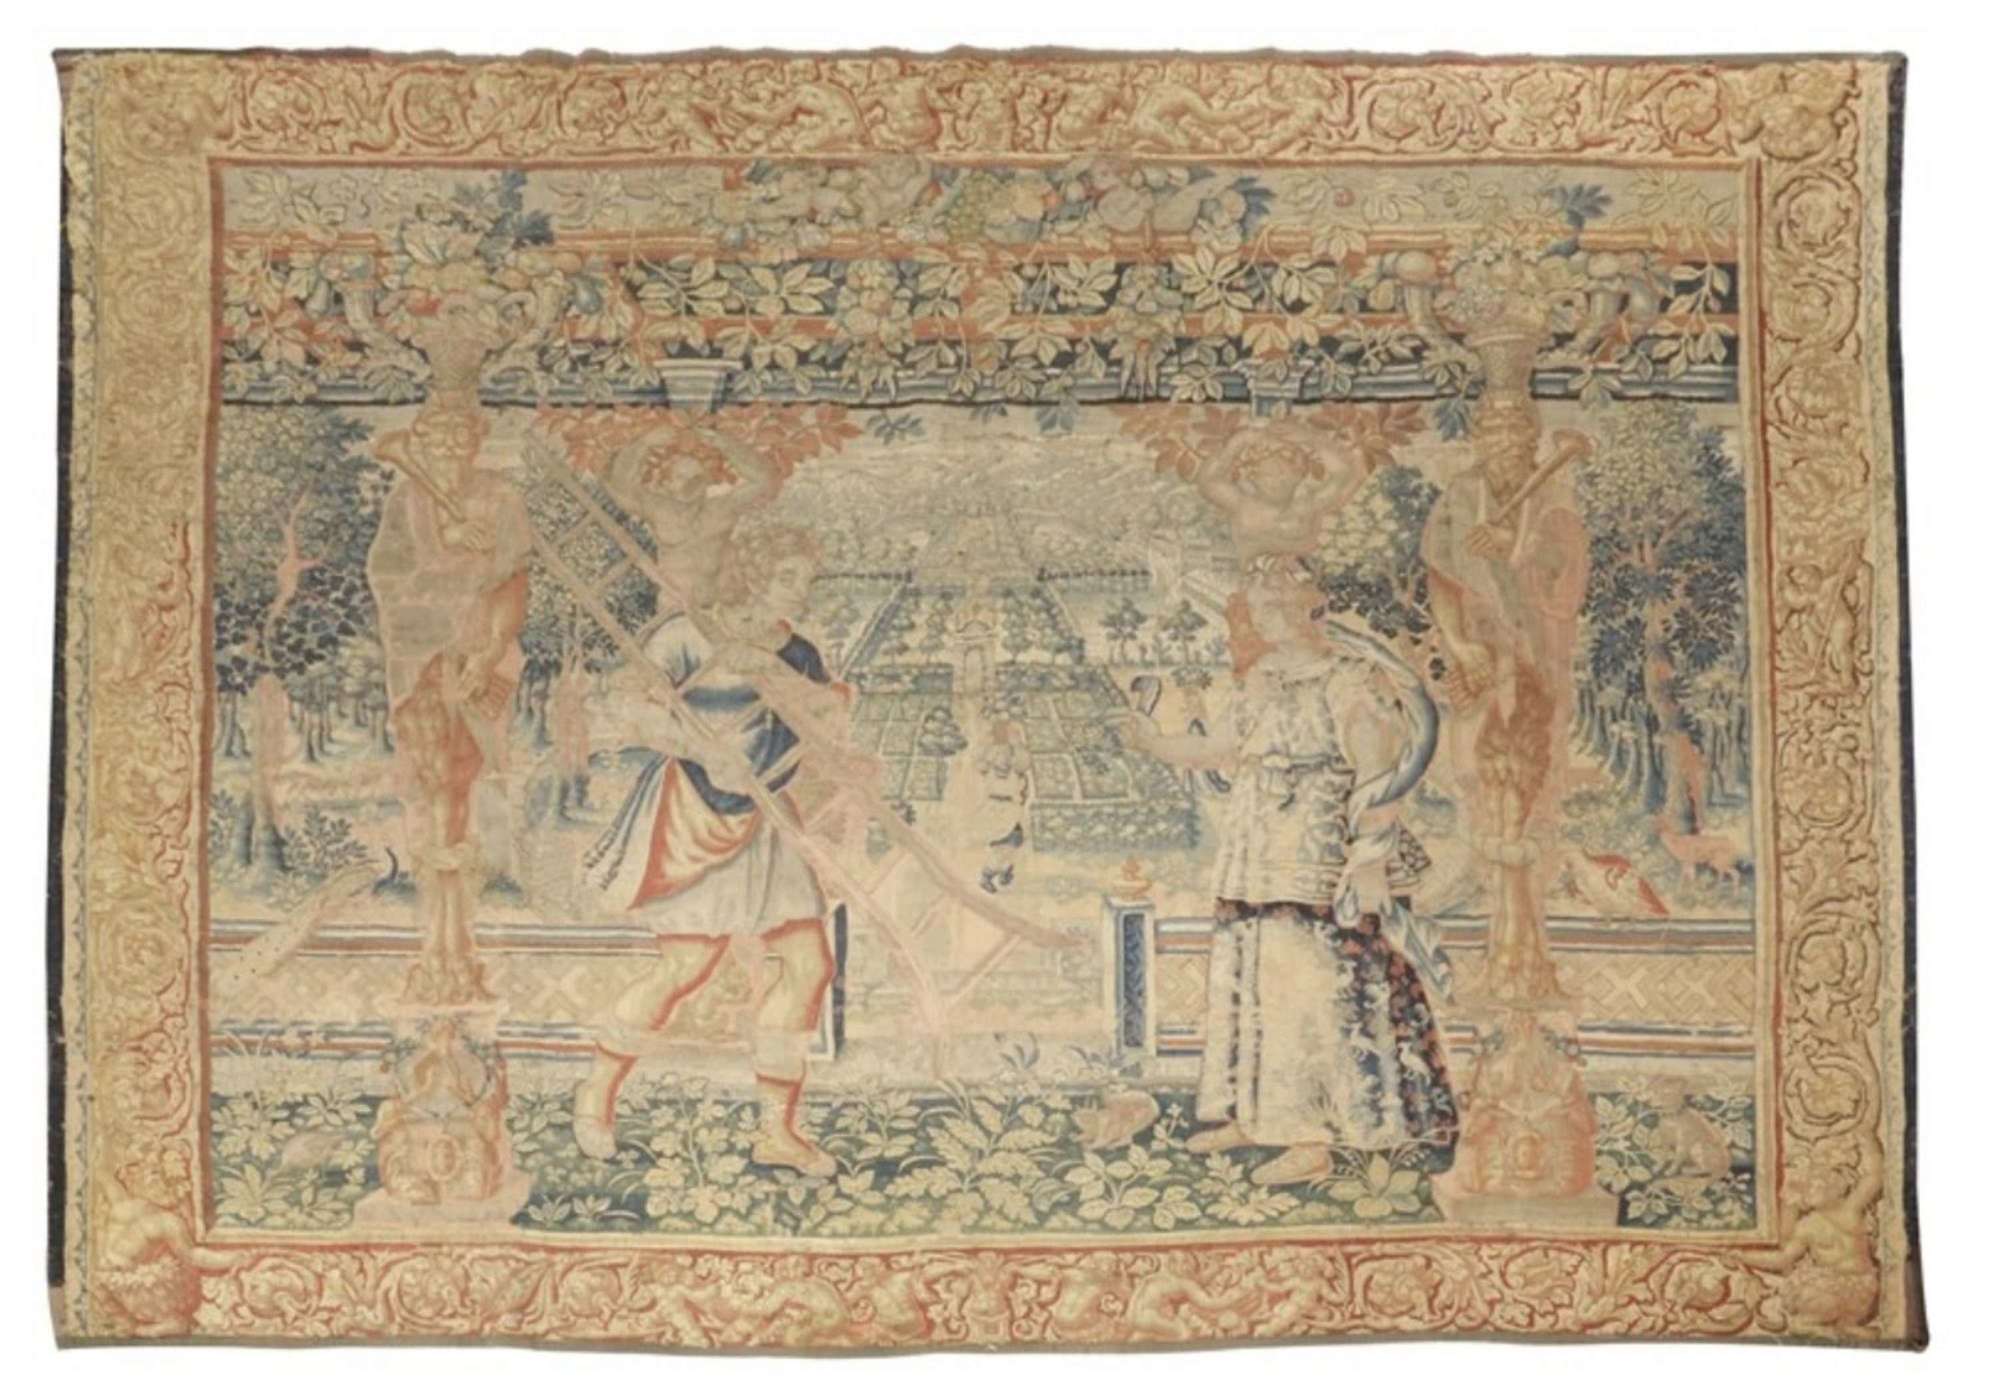 A BRUSSELS MYTHOLOGICAL TAPESTRY SECOND HALF 16TH CENTURY